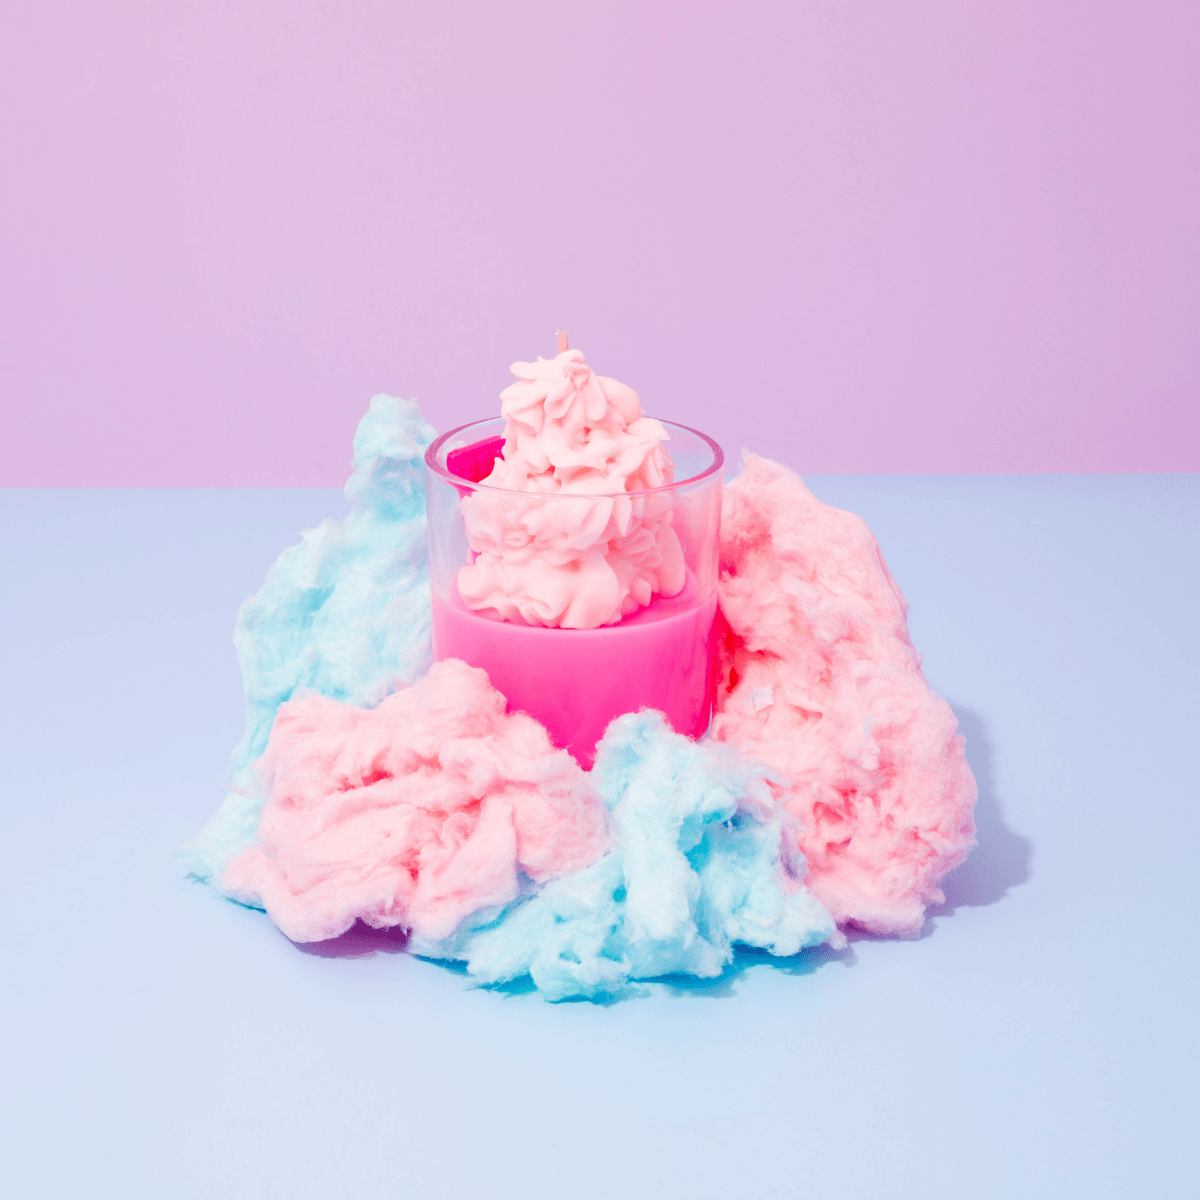 cotton candy dessert candle